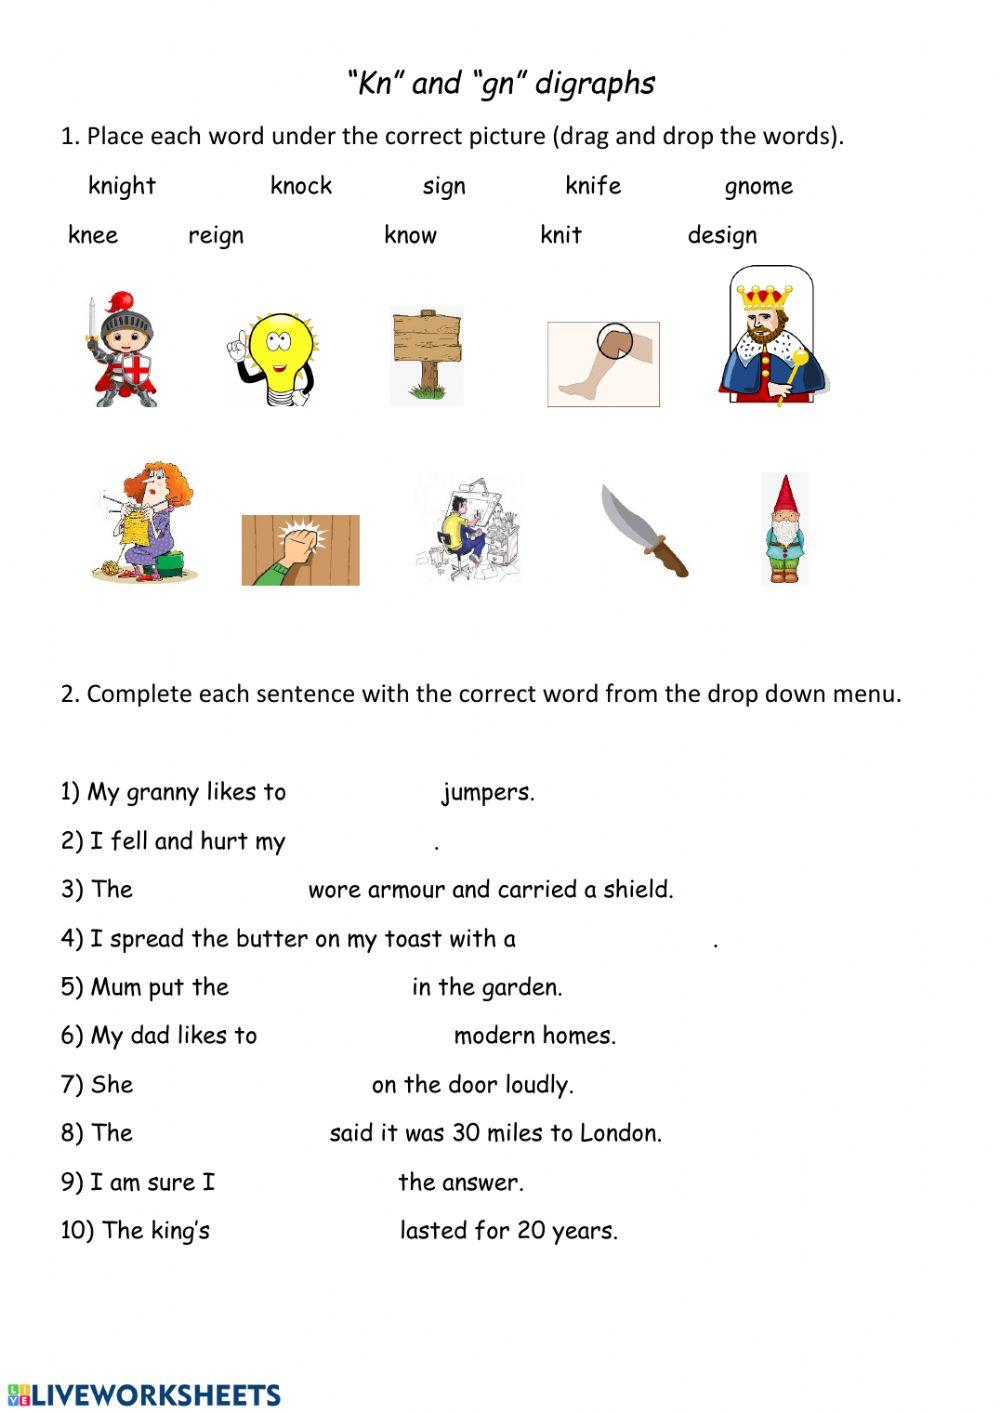 Kn and Gn digraphs